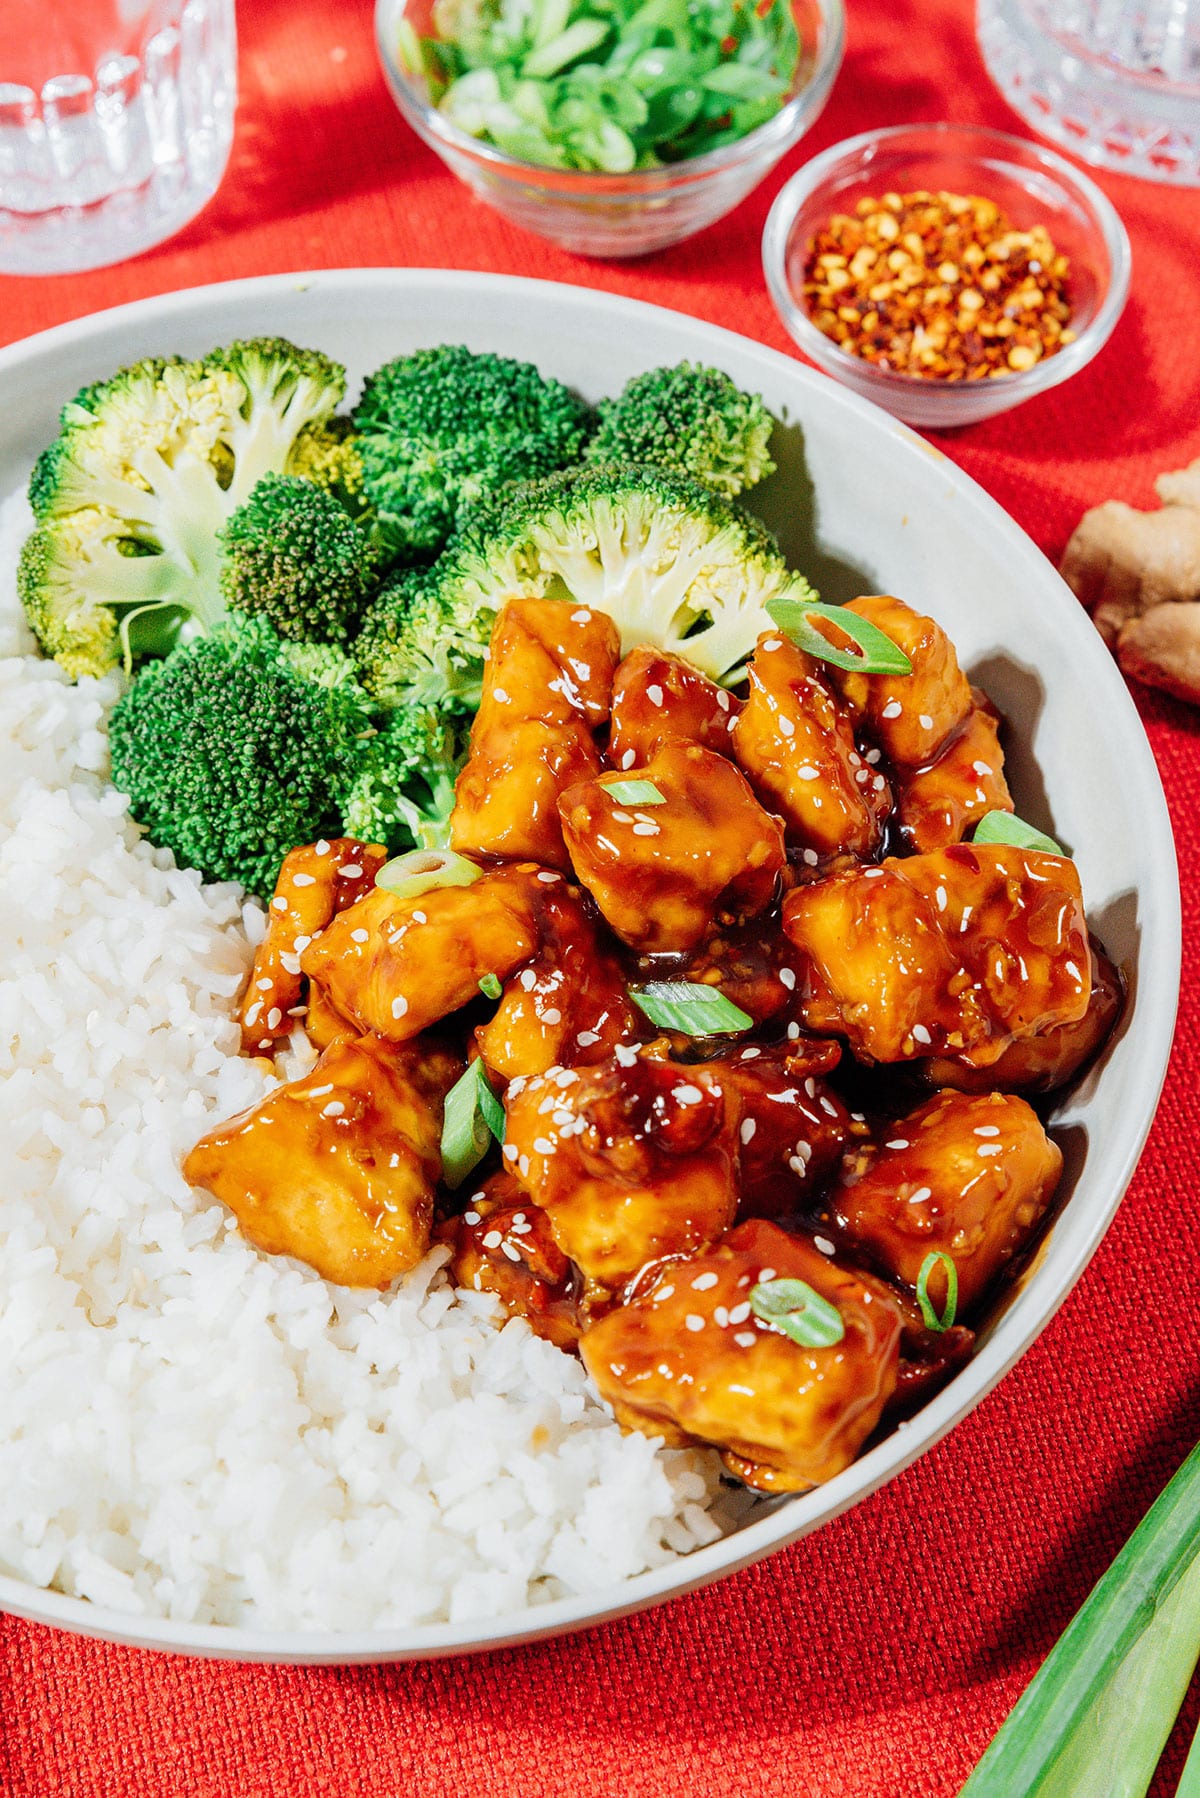 General tso's tofu in a bowl with rice and broccoli.